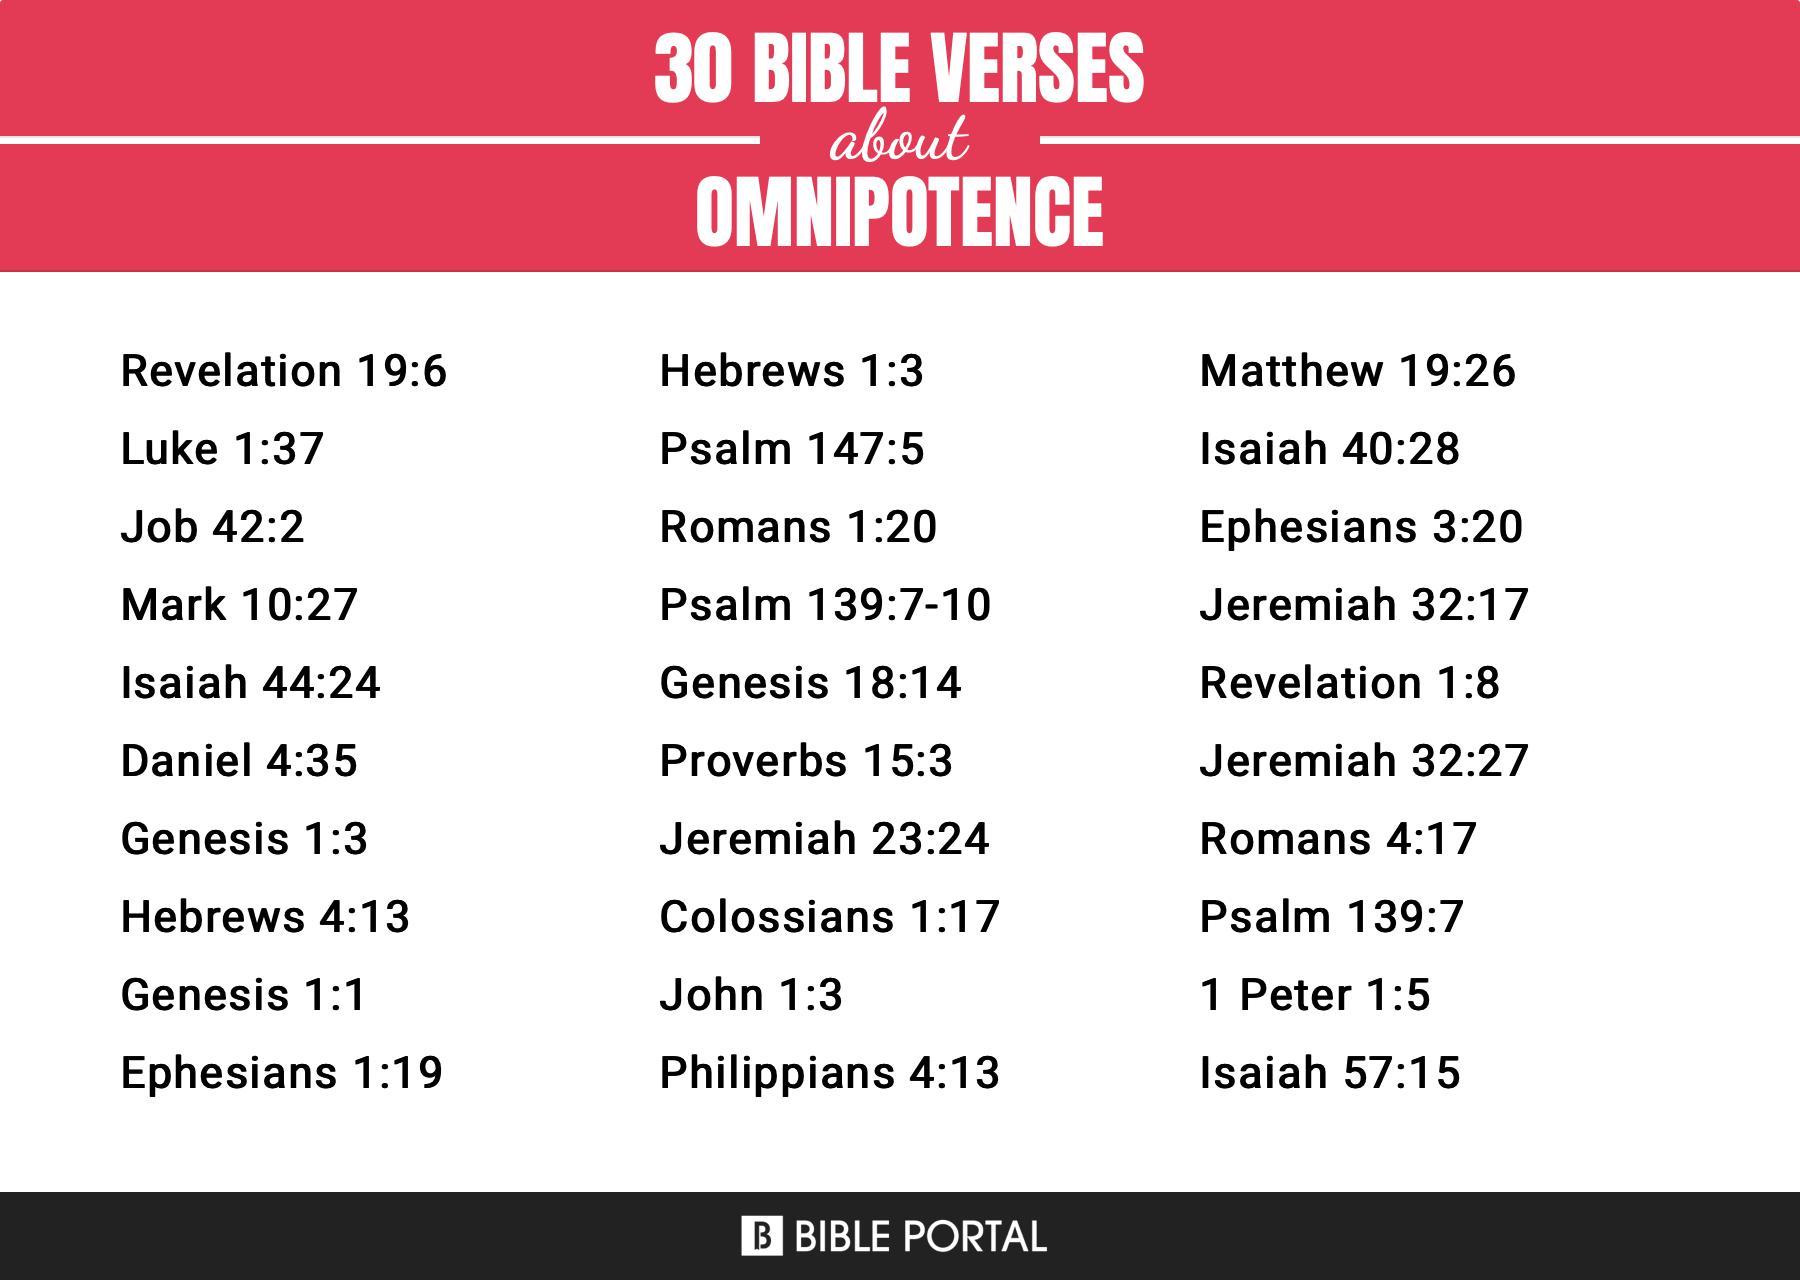 803 Bible Verses about Omnipotence